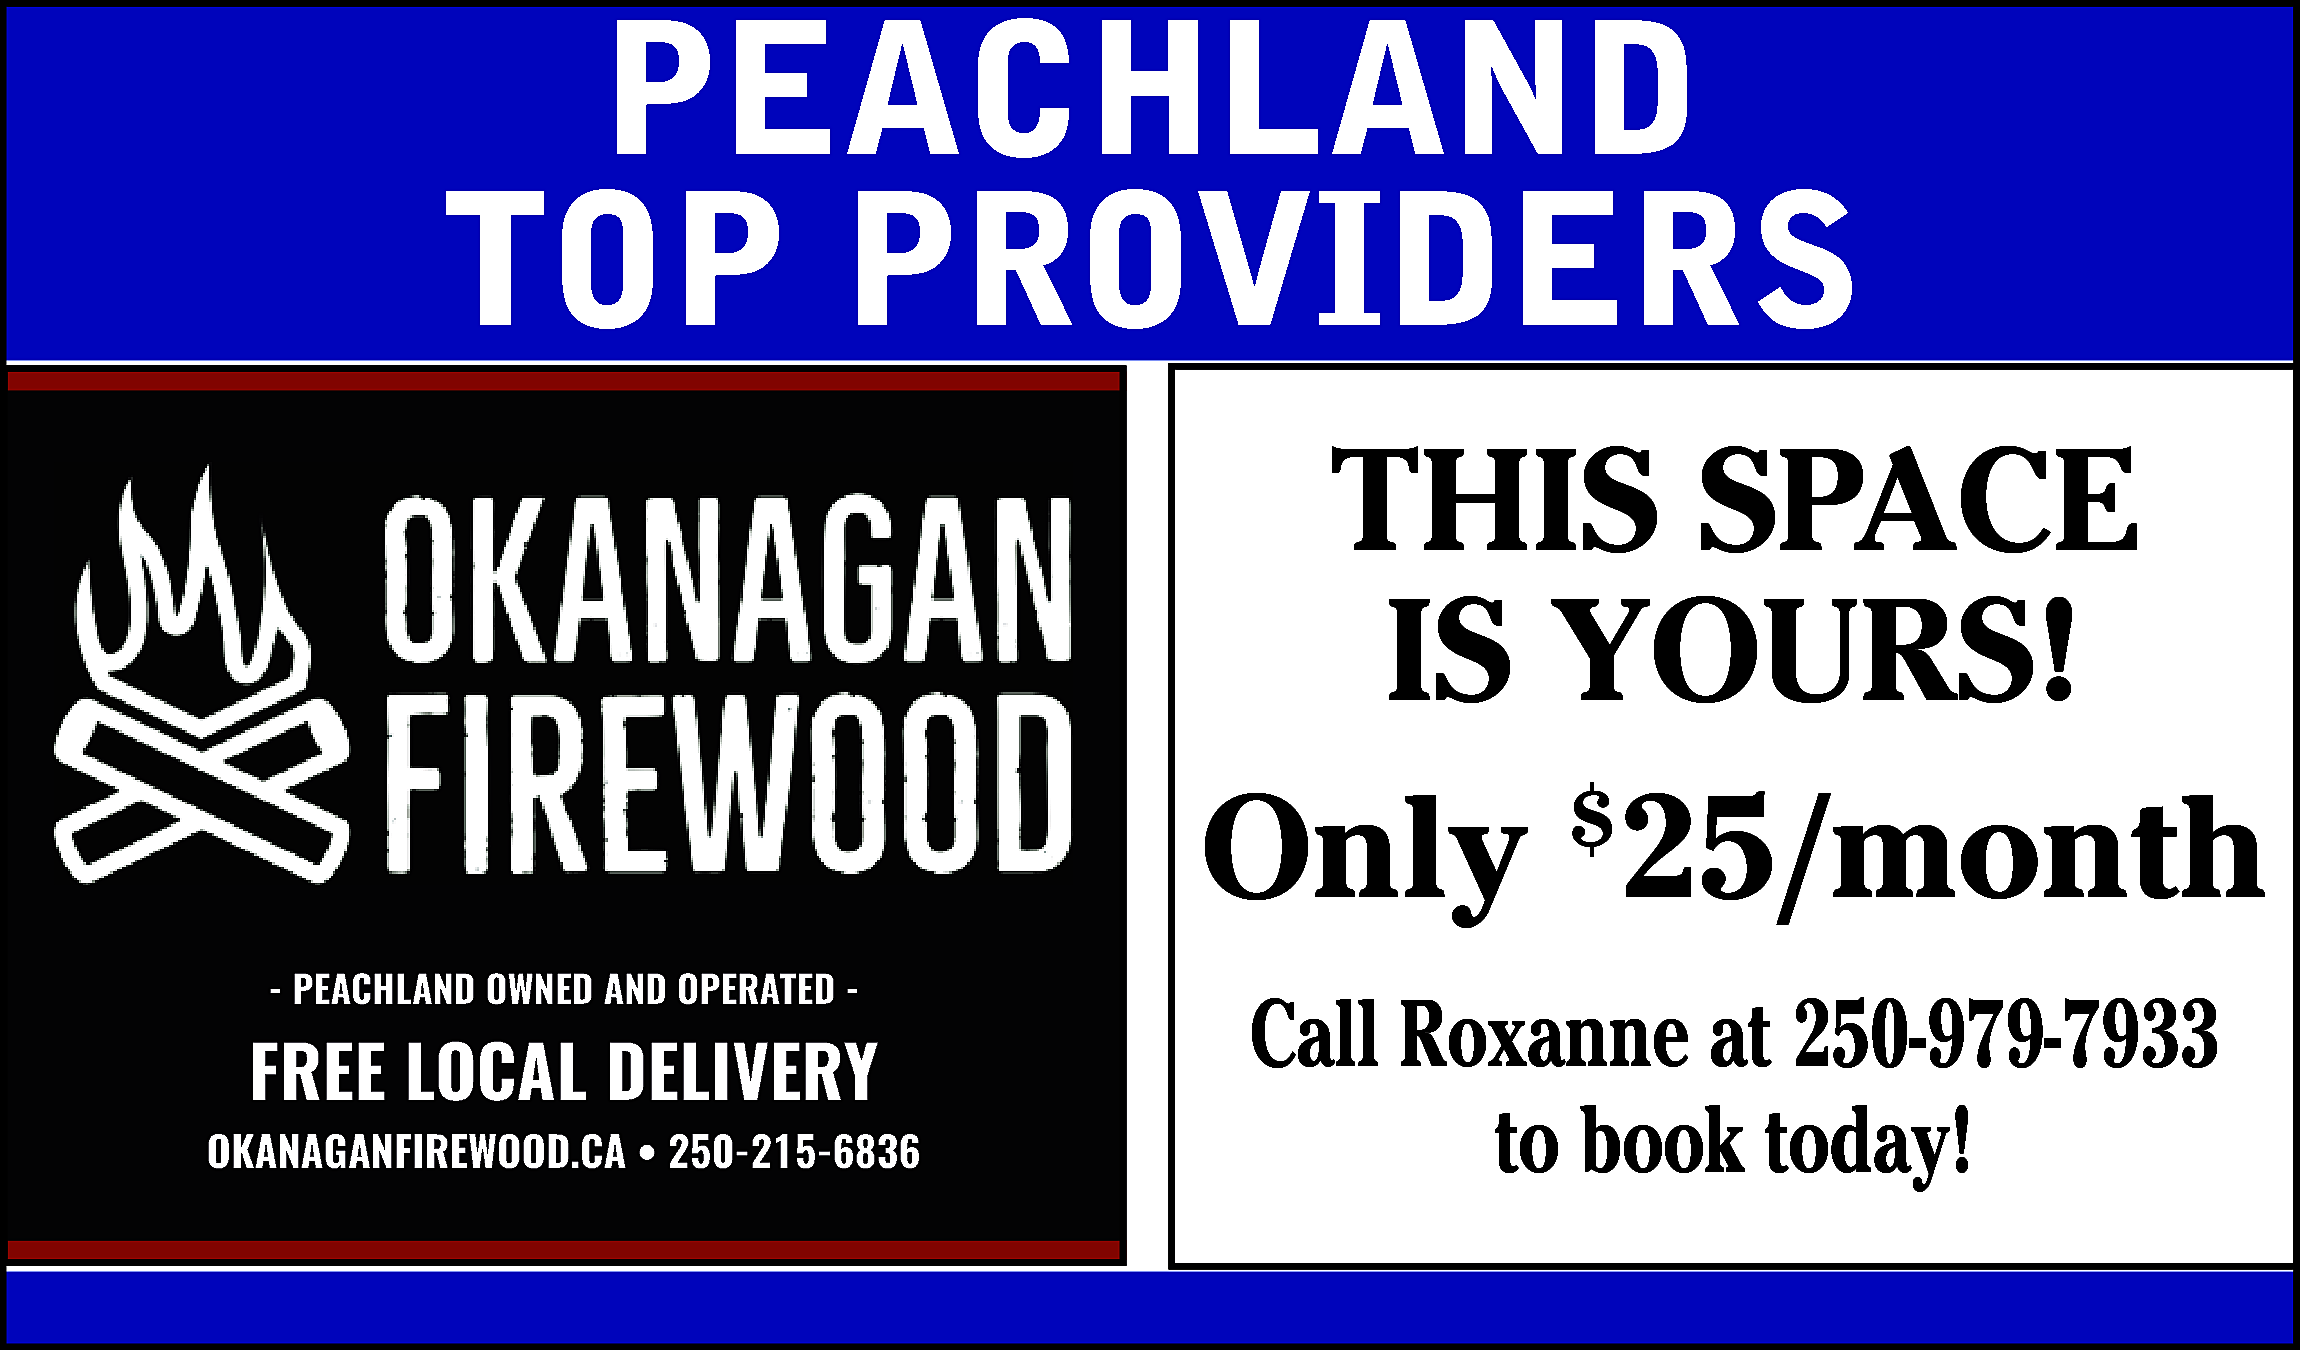 PEACHLAND <br>TOP PROVIDERS <br>THIS SPACE  PEACHLAND  TOP PROVIDERS  THIS SPACE  IS YOURS!  Only $25/month  - PEACHLAND OWNED AND OPERATED -    FREE LOCAL DELIVERY  www.okanaganfirewood.ca/  OKANAGANFIREWOOD.CA • 250-215-6836    Call Roxanne at 250-979-7933  to book today!    